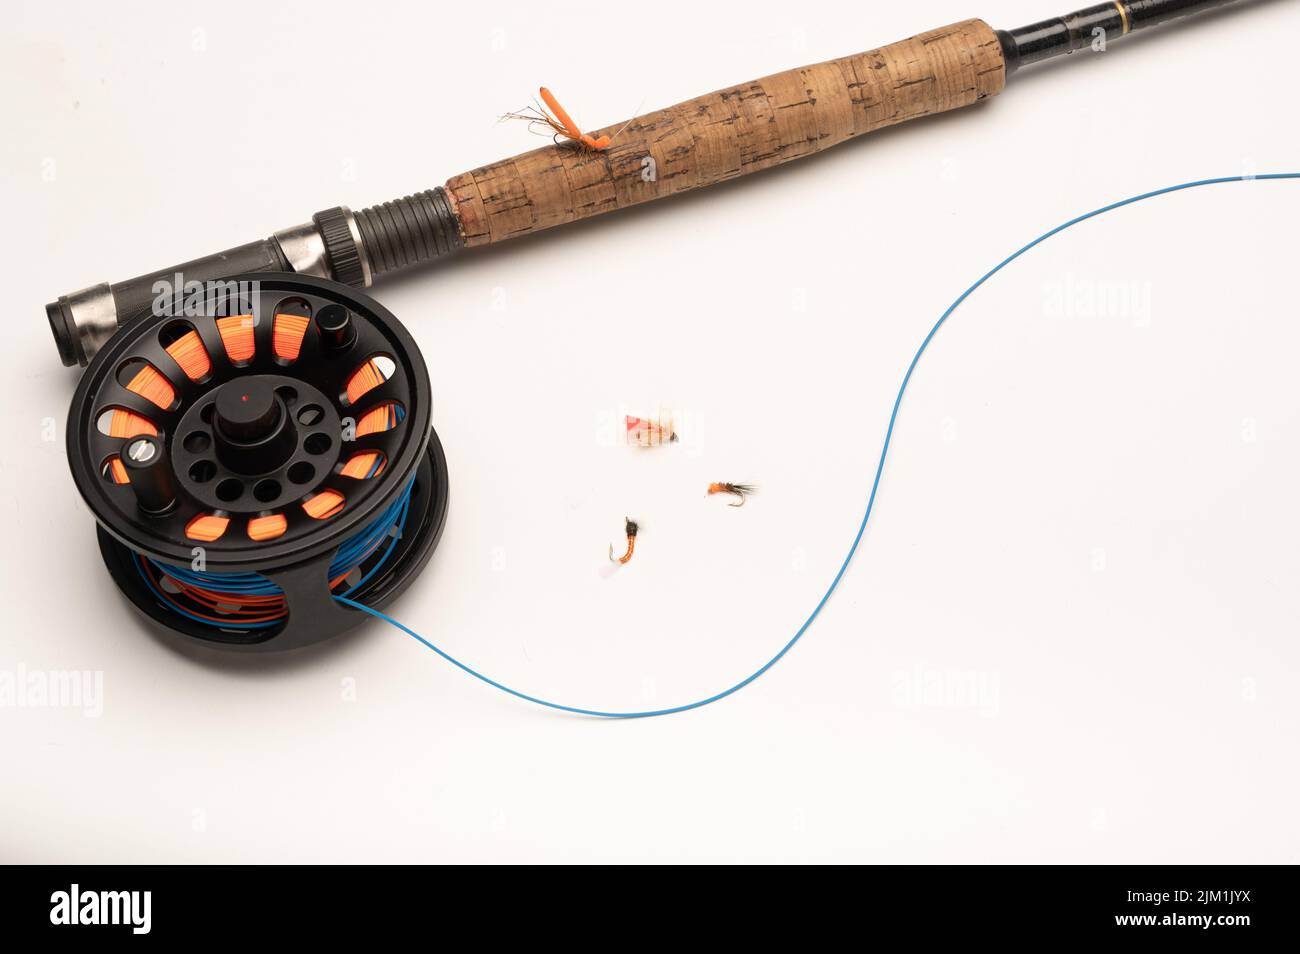 Fly fishing reel, rod, and flies on a white background with copy space Stock Photo